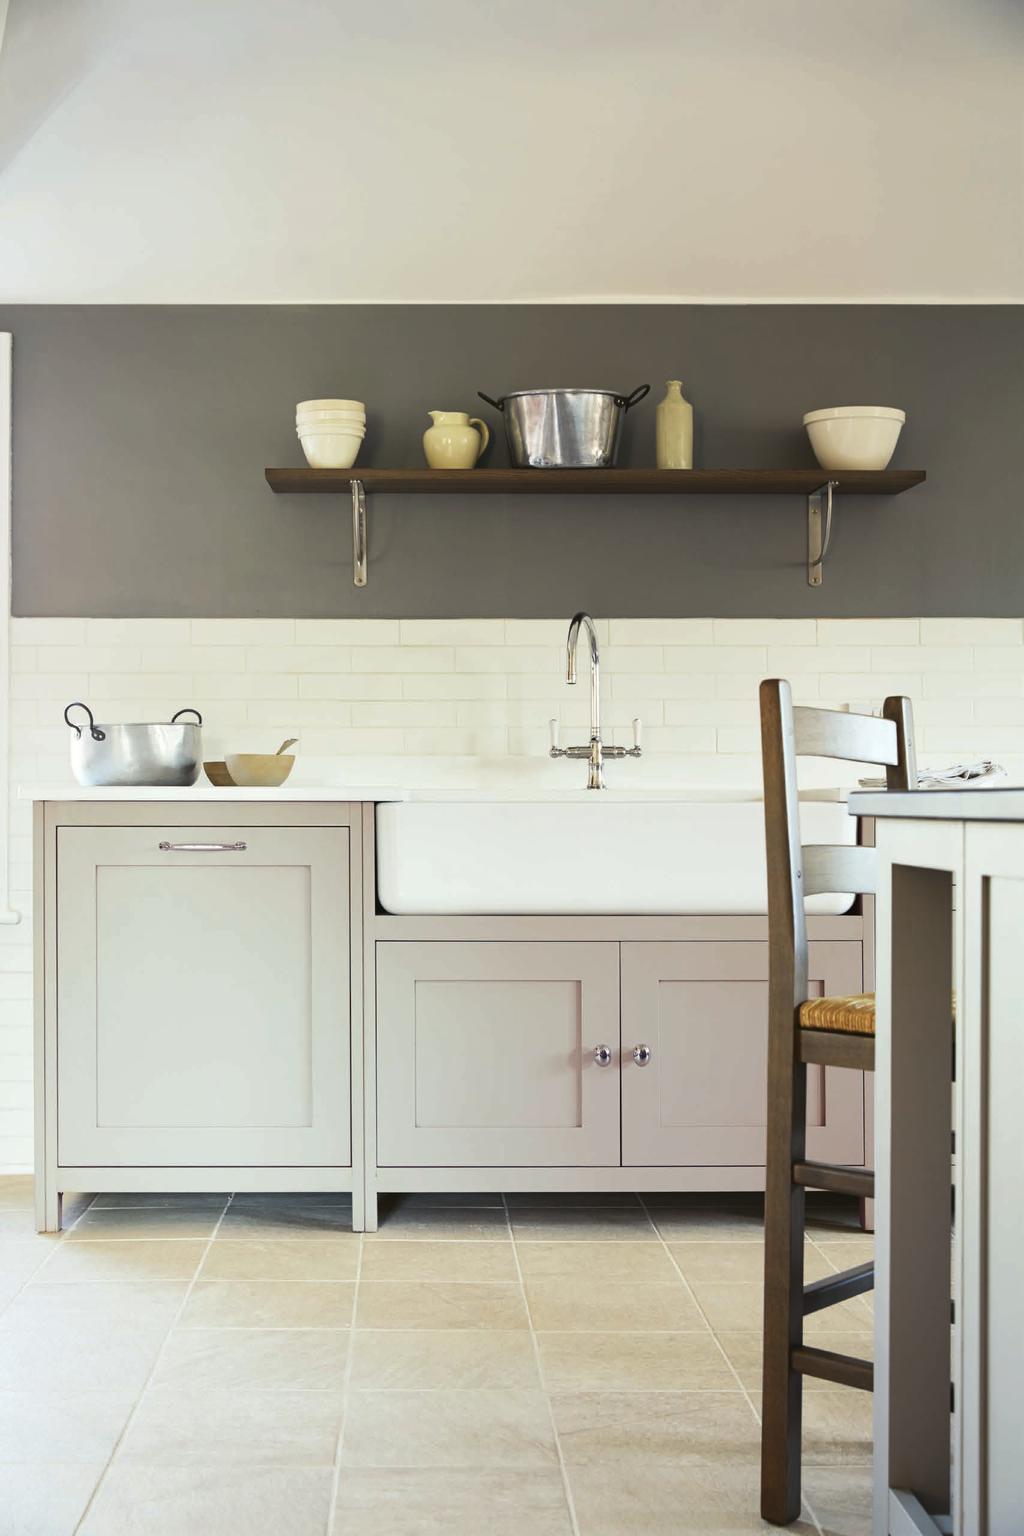 freestanding VERMONT The relaxed East Coast style of our freestanding Vermont kitchen is available with the following options, allowing you to create the laid back, eclectic look in your kitchen,